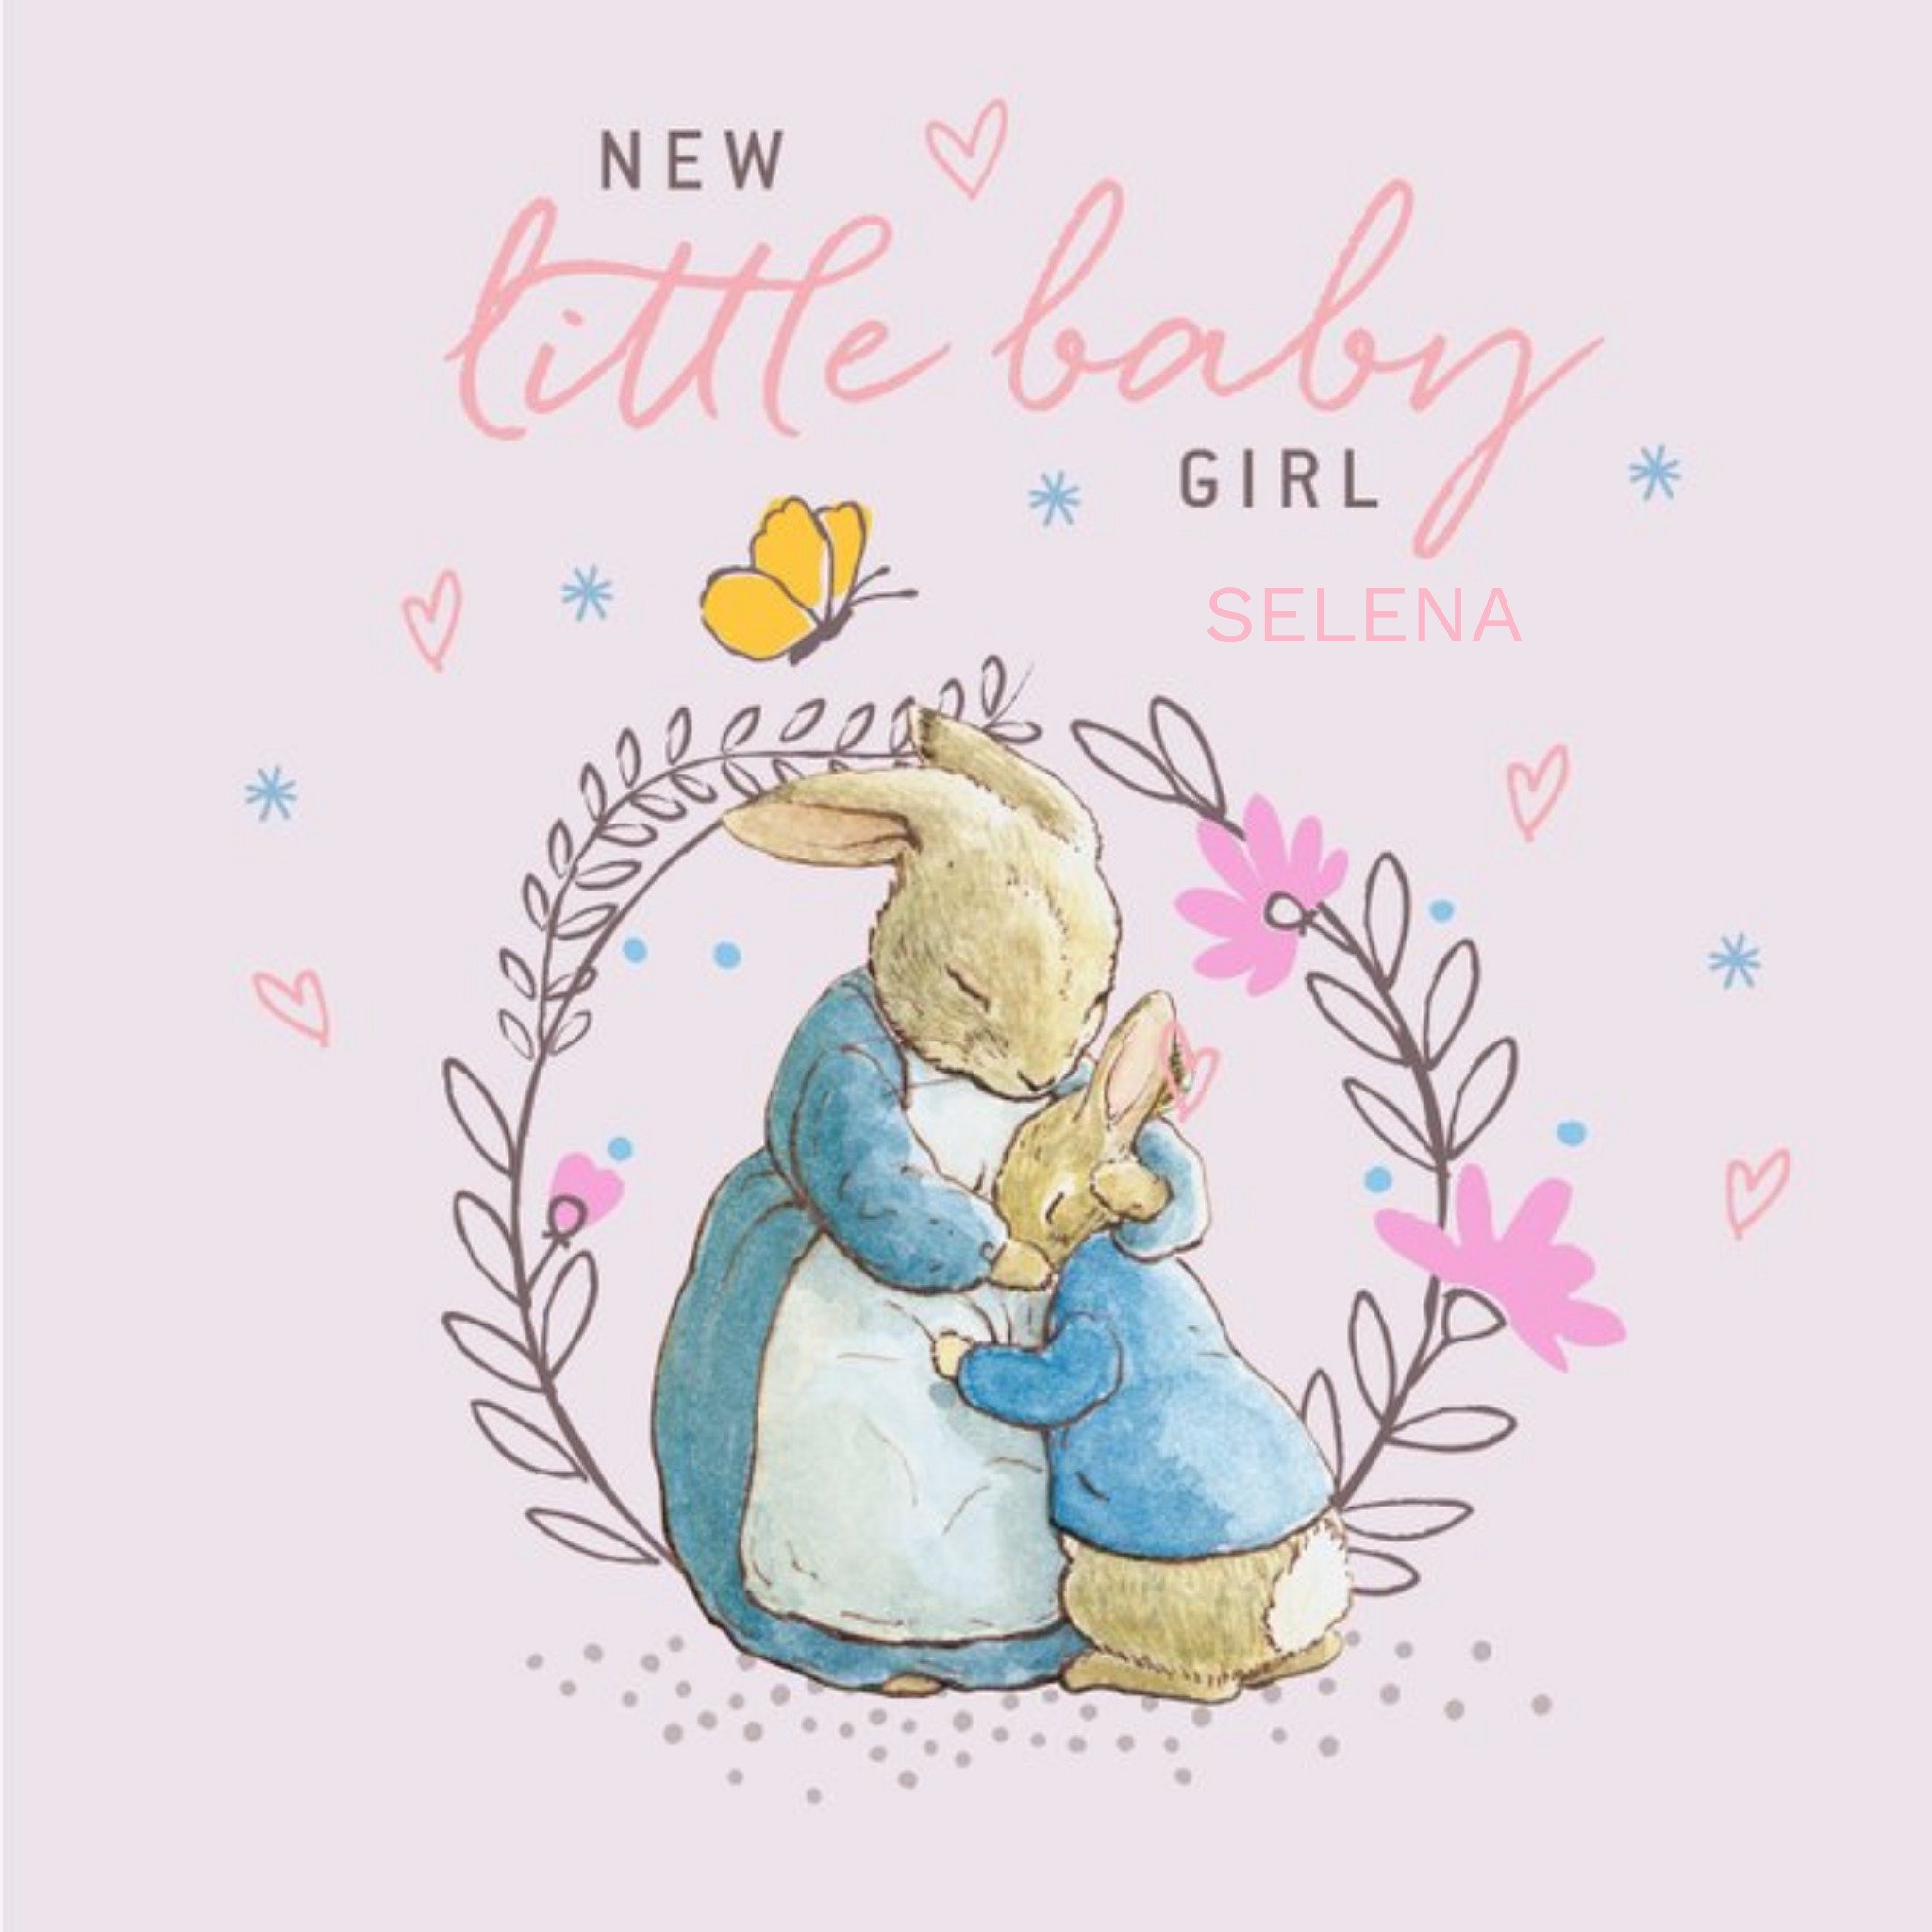 New Baby Card - Baby Girl - Peter Rabbit - Beatrix Potter, Large